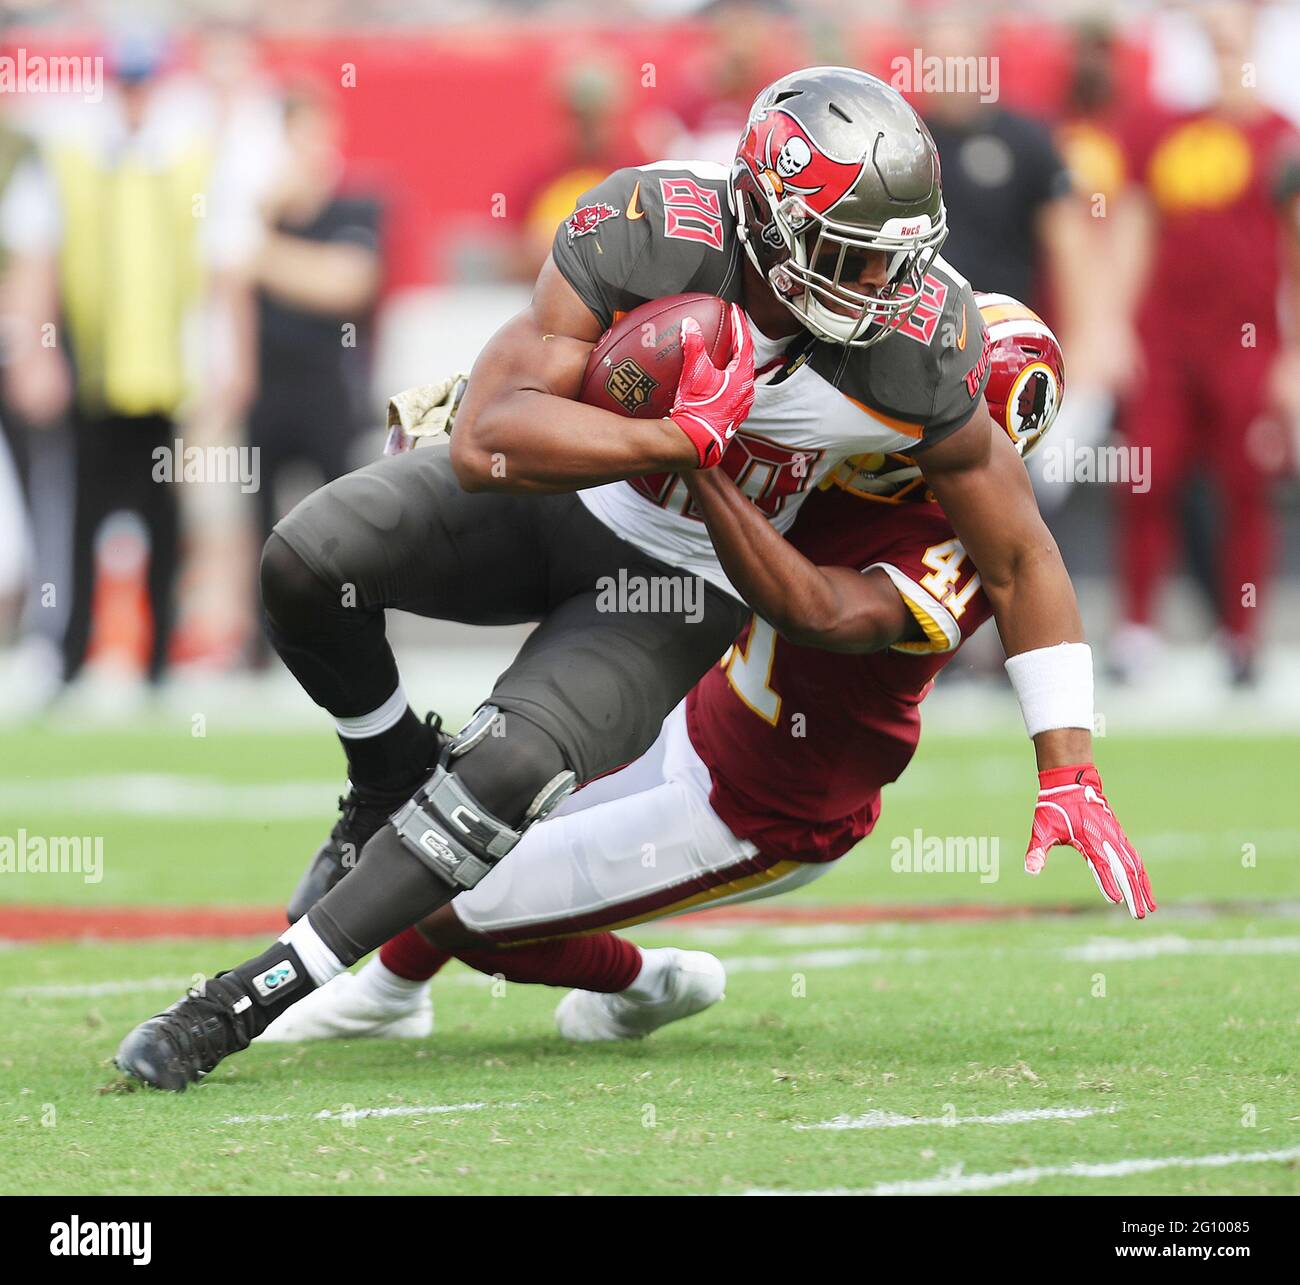 Tampa, USA. 11th Nov, 2018. Tampa Bay Buccaneers tight end O.J. Howard (80) gets tackled by Washington Redskins defensive back Danny Johnson (41) while running the ball for a first down during the second quarter on Sunday, Nov. 11, 2018 at Raymond James Stadium in Tampa, Florida. (Photo by Monica Herndon/Tampa Bay Times/TNS/Sipa USA) Credit: Sipa USA/Alamy Live News Stock Photo